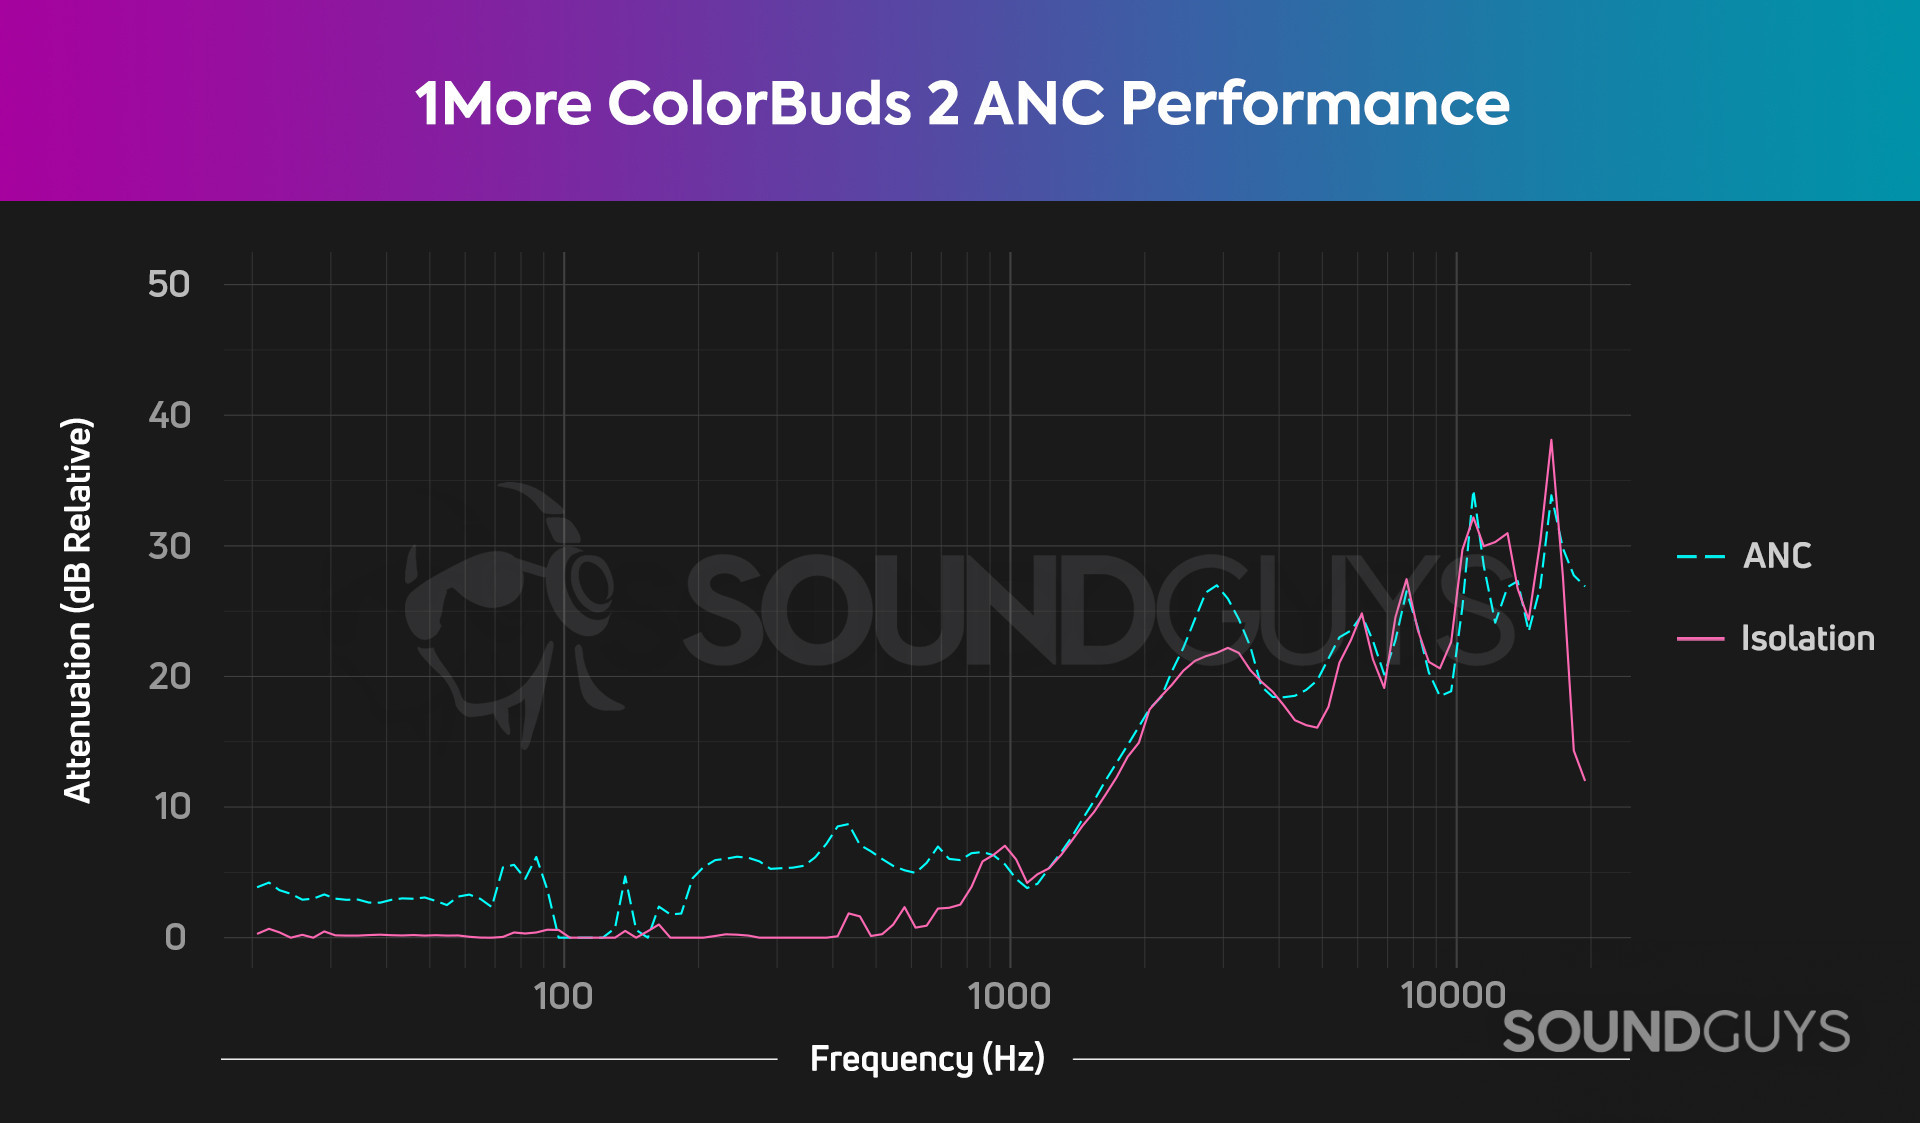 The ANC and isolation performance chart for the the 1More ColorBuds 2 which shows that these earbuds only block out mainly mids and highs, not lows.